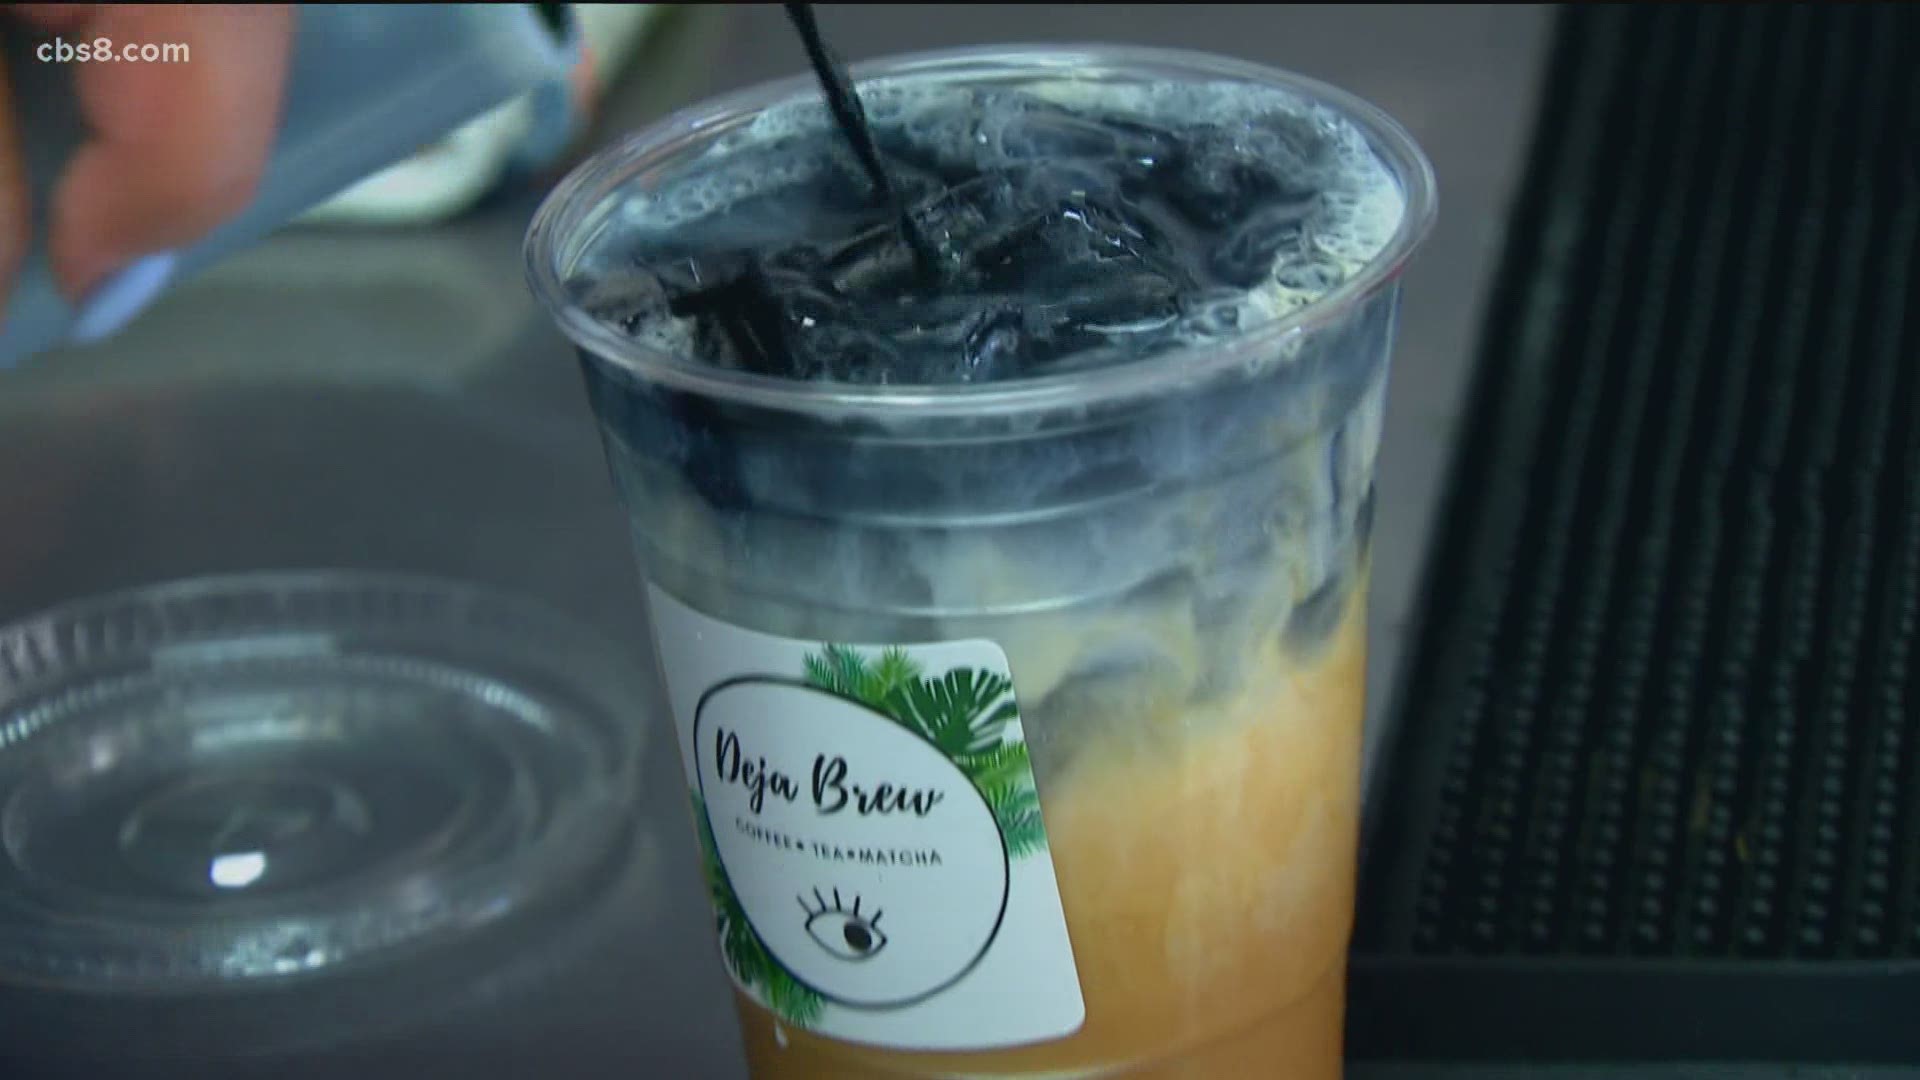 Deja Brew Lounge has a menu that is a concoction of Asian and Mexican flavors. The drinks are beautiful and delicious